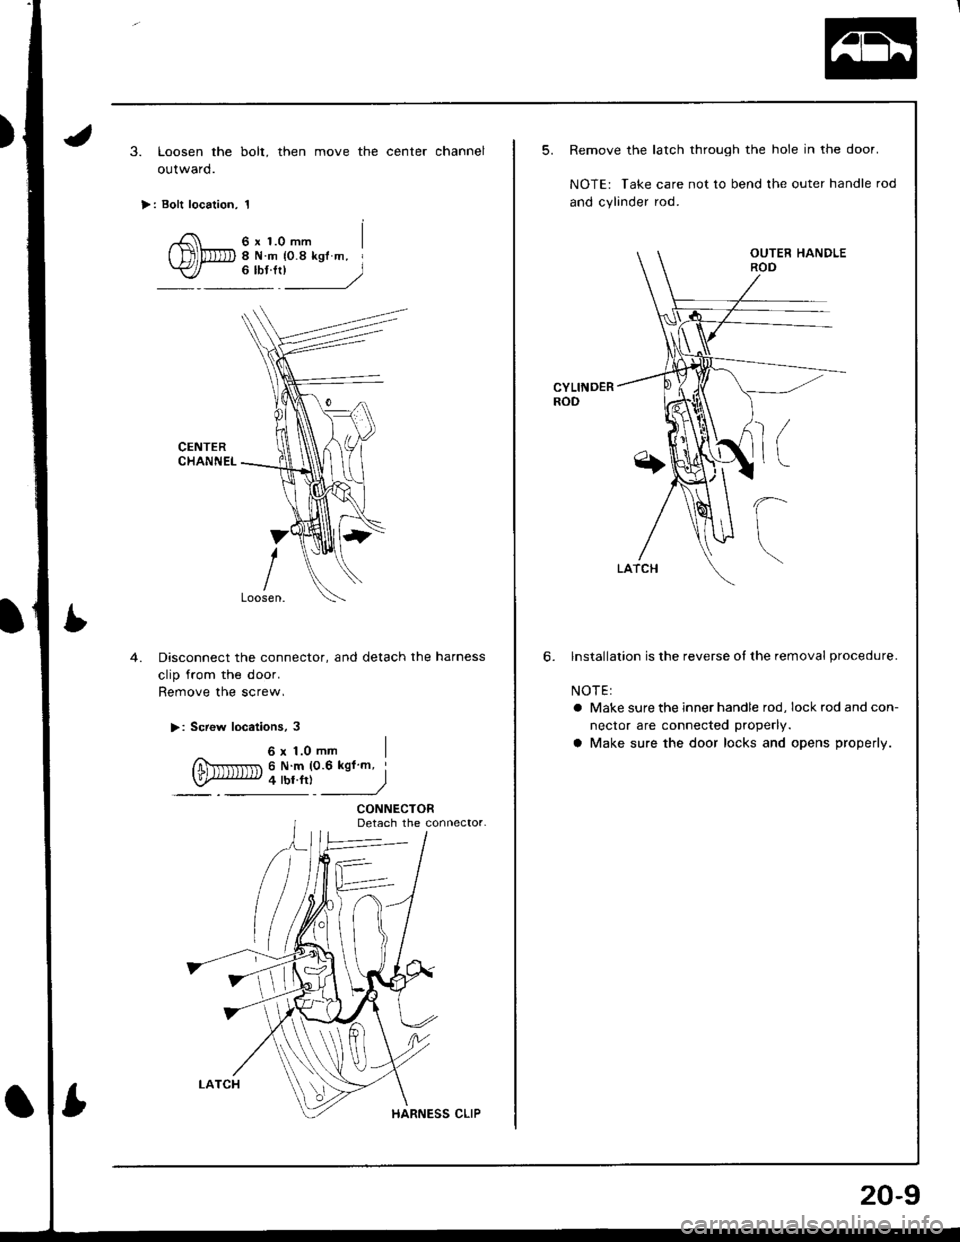 HONDA INTEGRA 1998 4.G Workshop Manual 3. Loosen the bolt, then move the center channel
outward.
>: Bolt location, 1
6 x 1.0 mm8Nm {0.8kglm, I"*l____)
CENTERCHANNEL
4.Disconnect the connector, and detach the harness
clip from the door.
Re